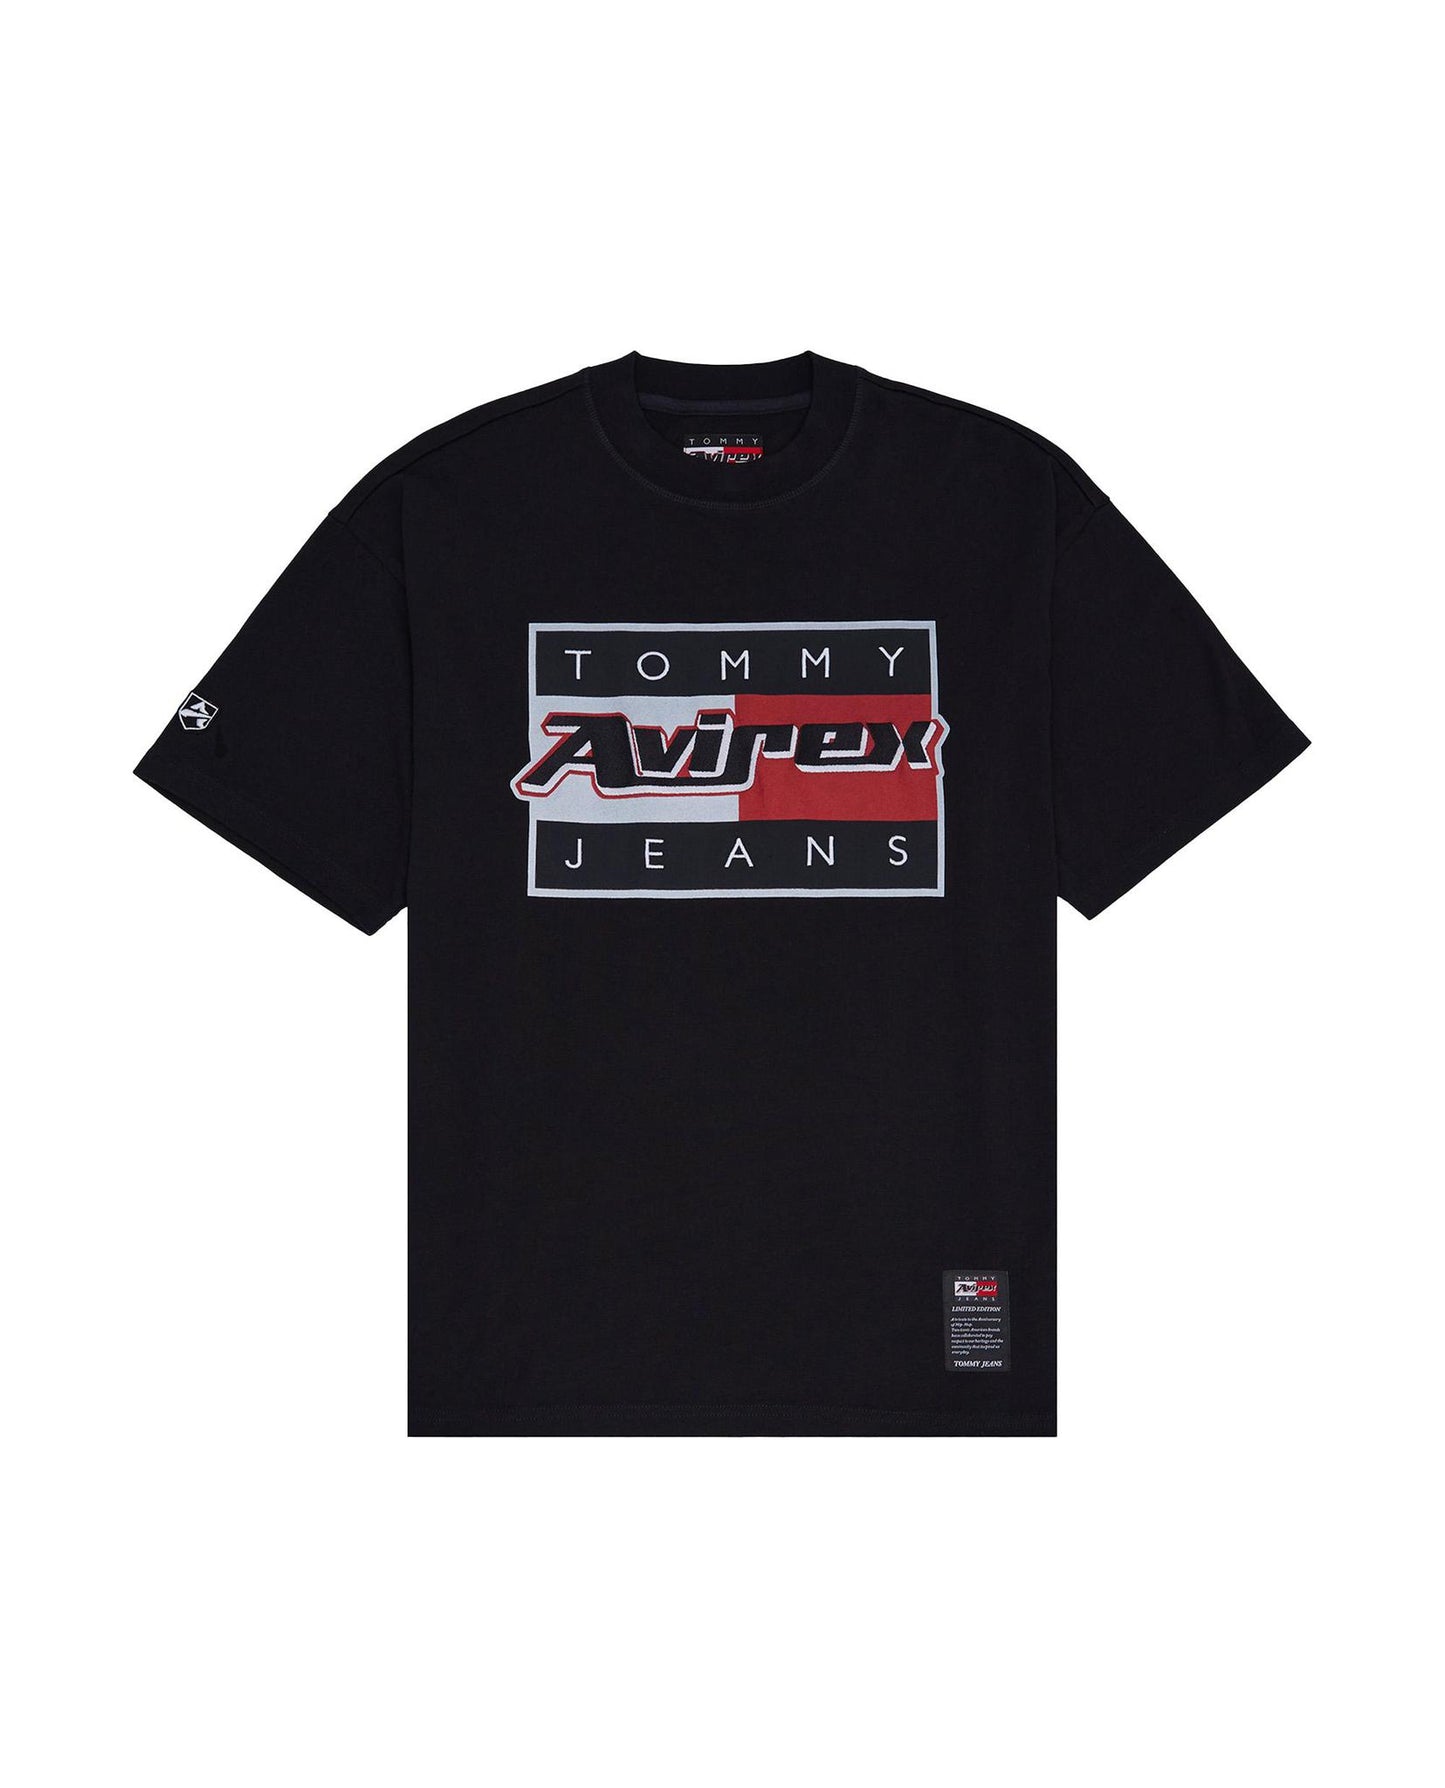 
                    
                      Tommy Jeans x Avirex Tee
                    
                  